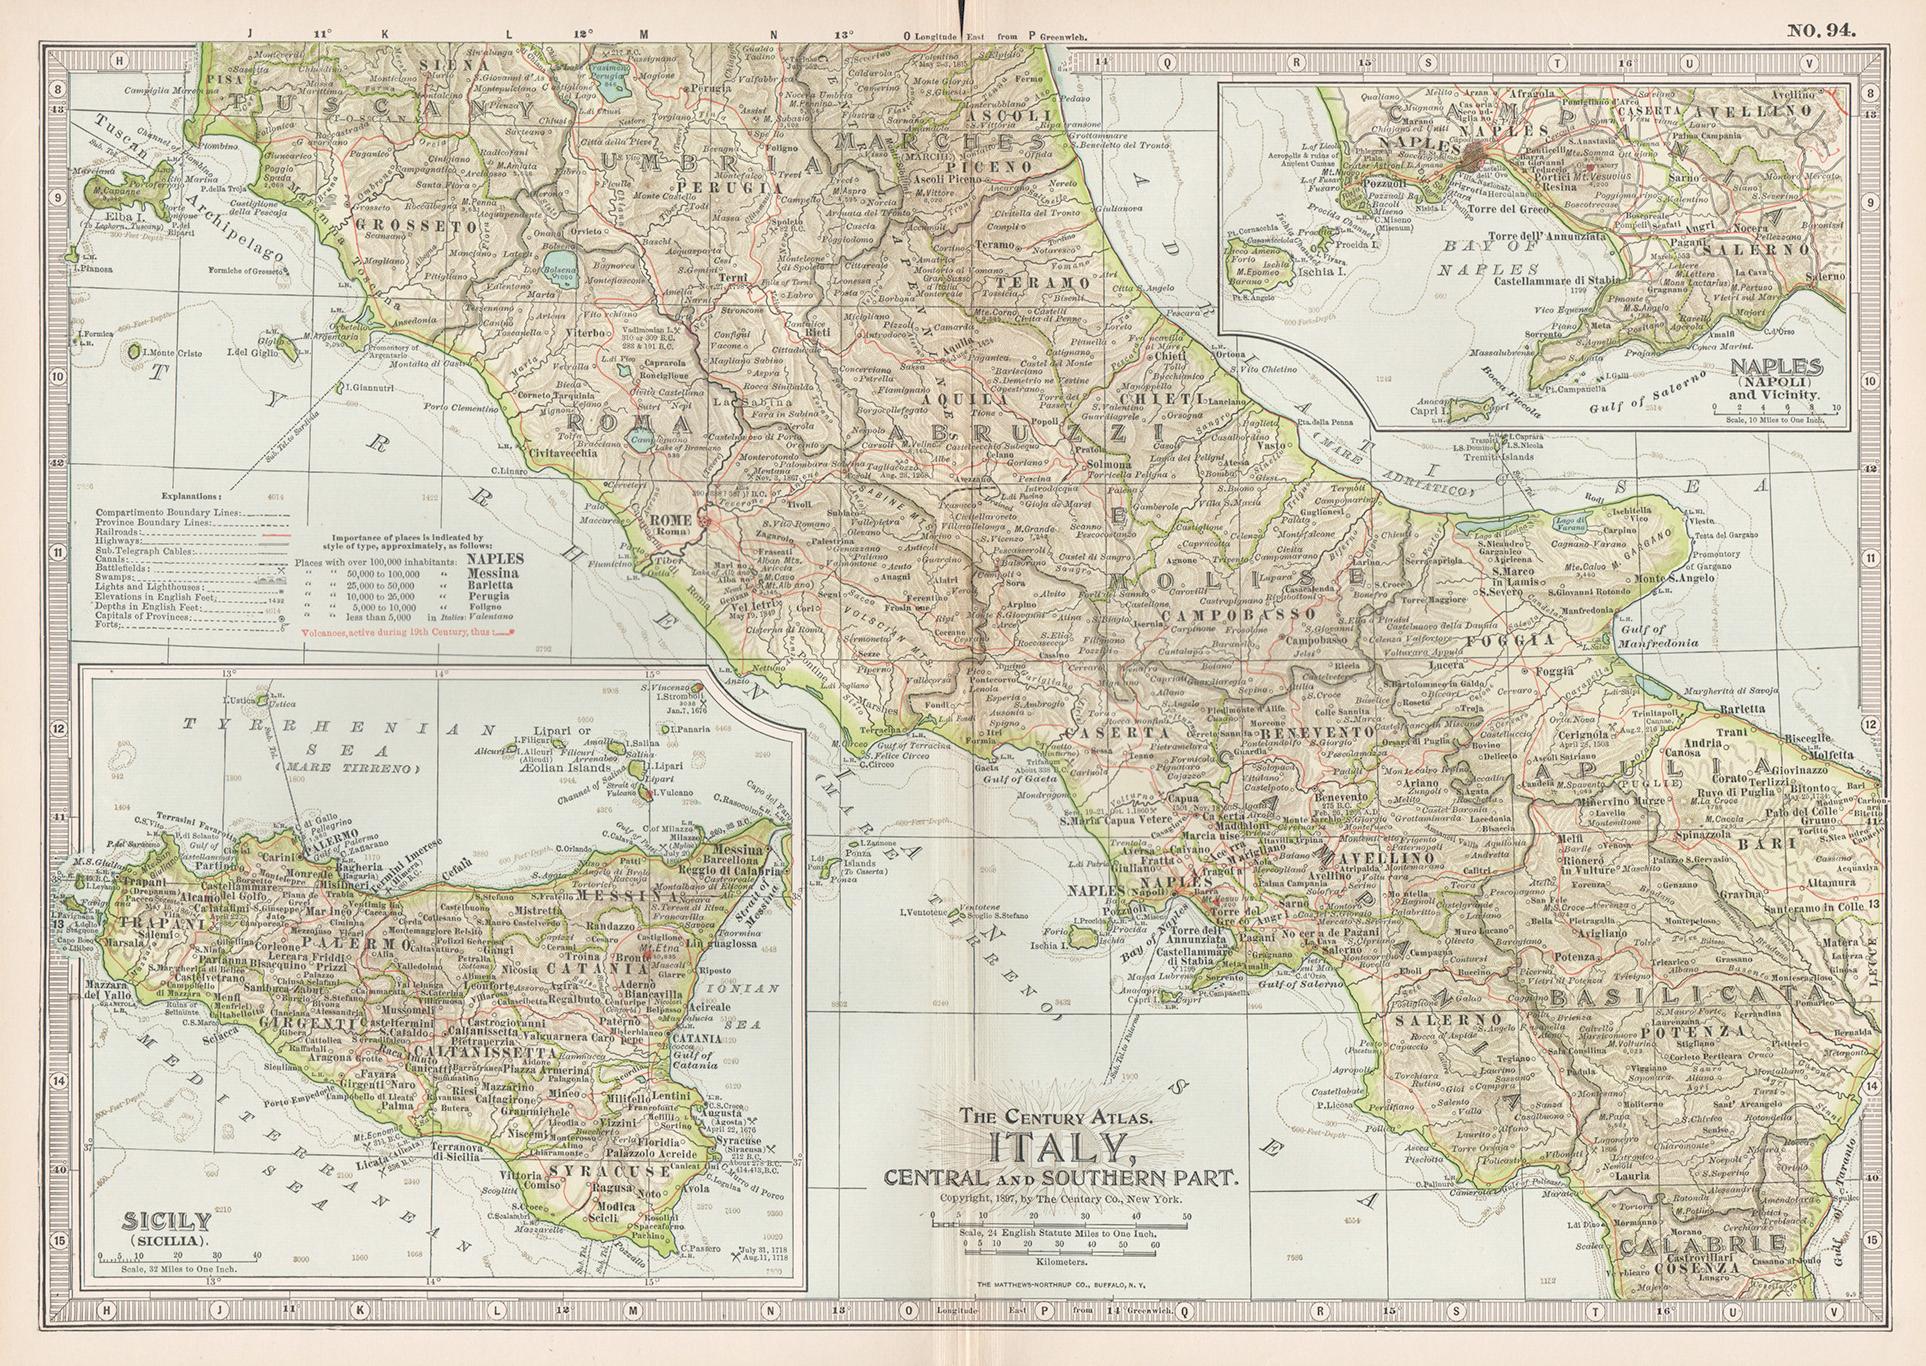 Unknown Print - Italy, Central and Southern Part. Century Atlas antique map